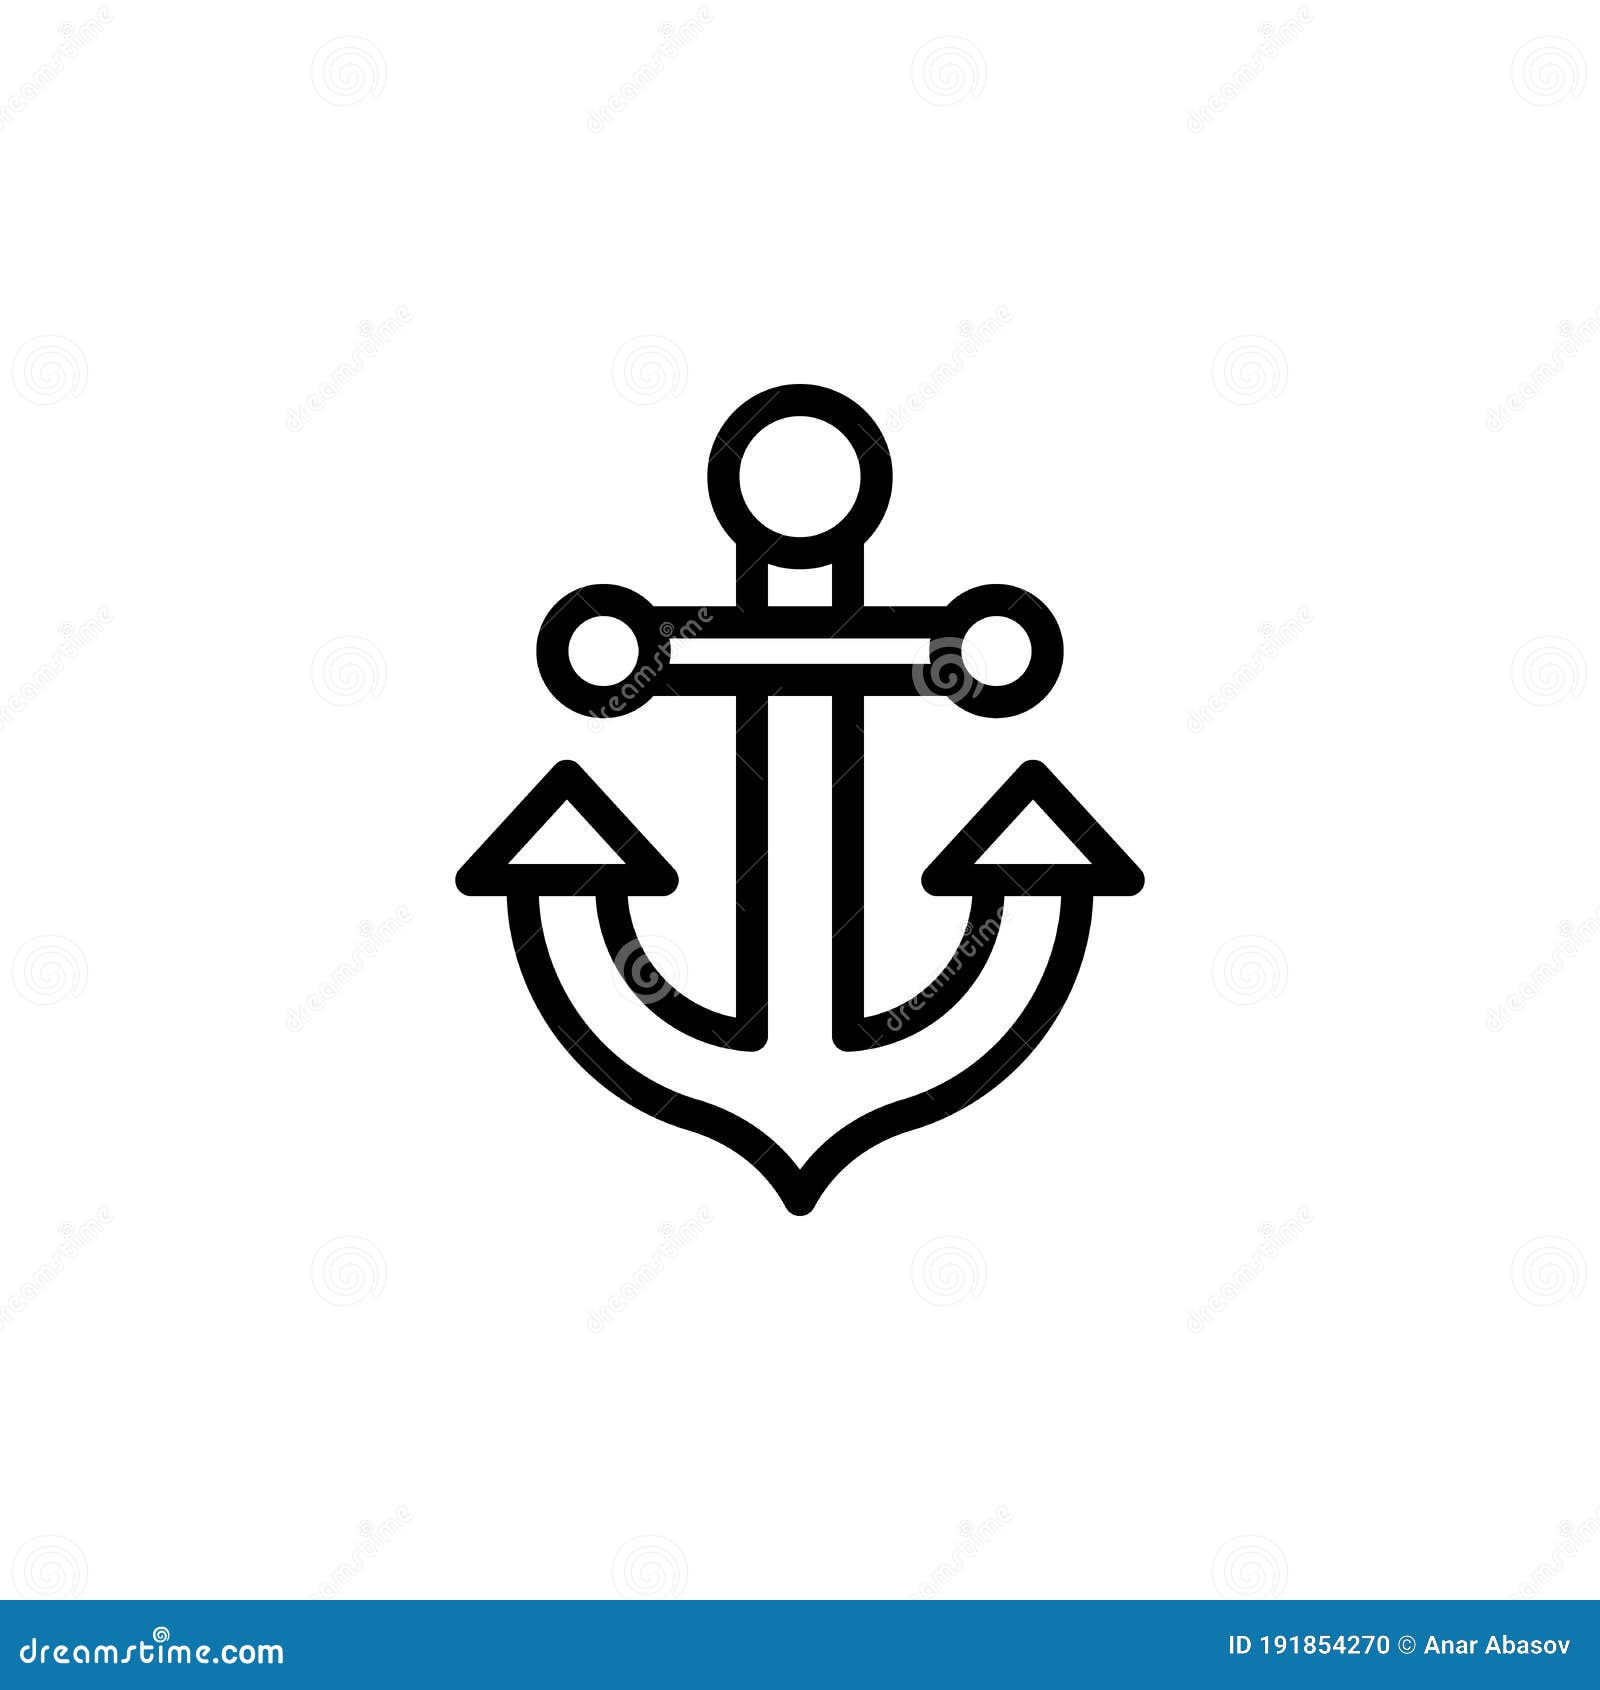 Simple Anchor Tattoo Template